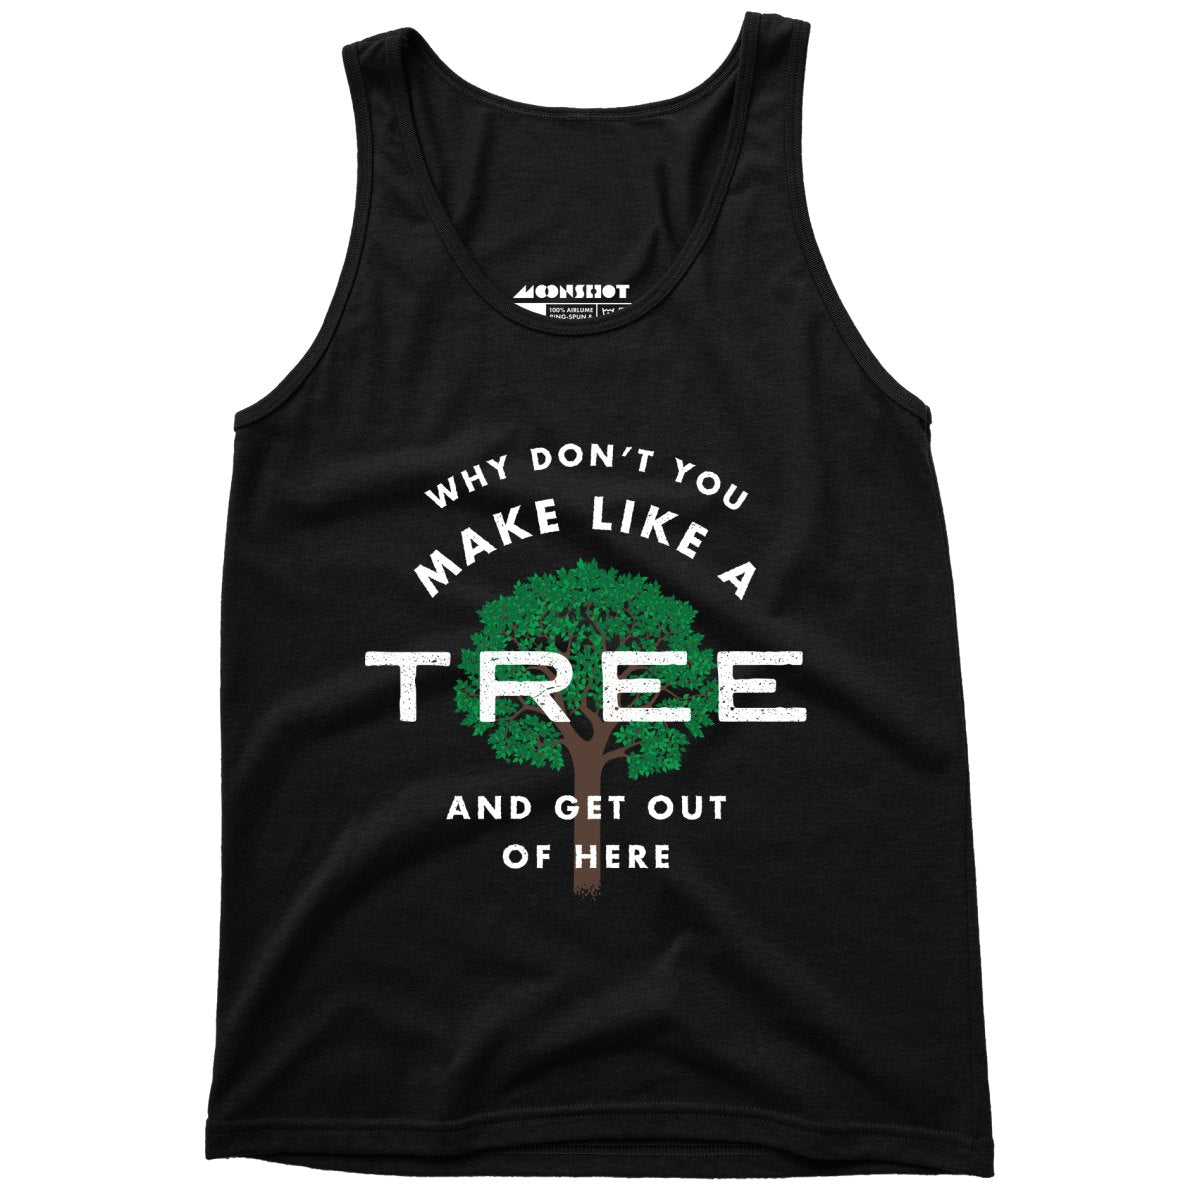 Why Don't You Make Like a Tree and Get Out of Here - Unisex Tank Top